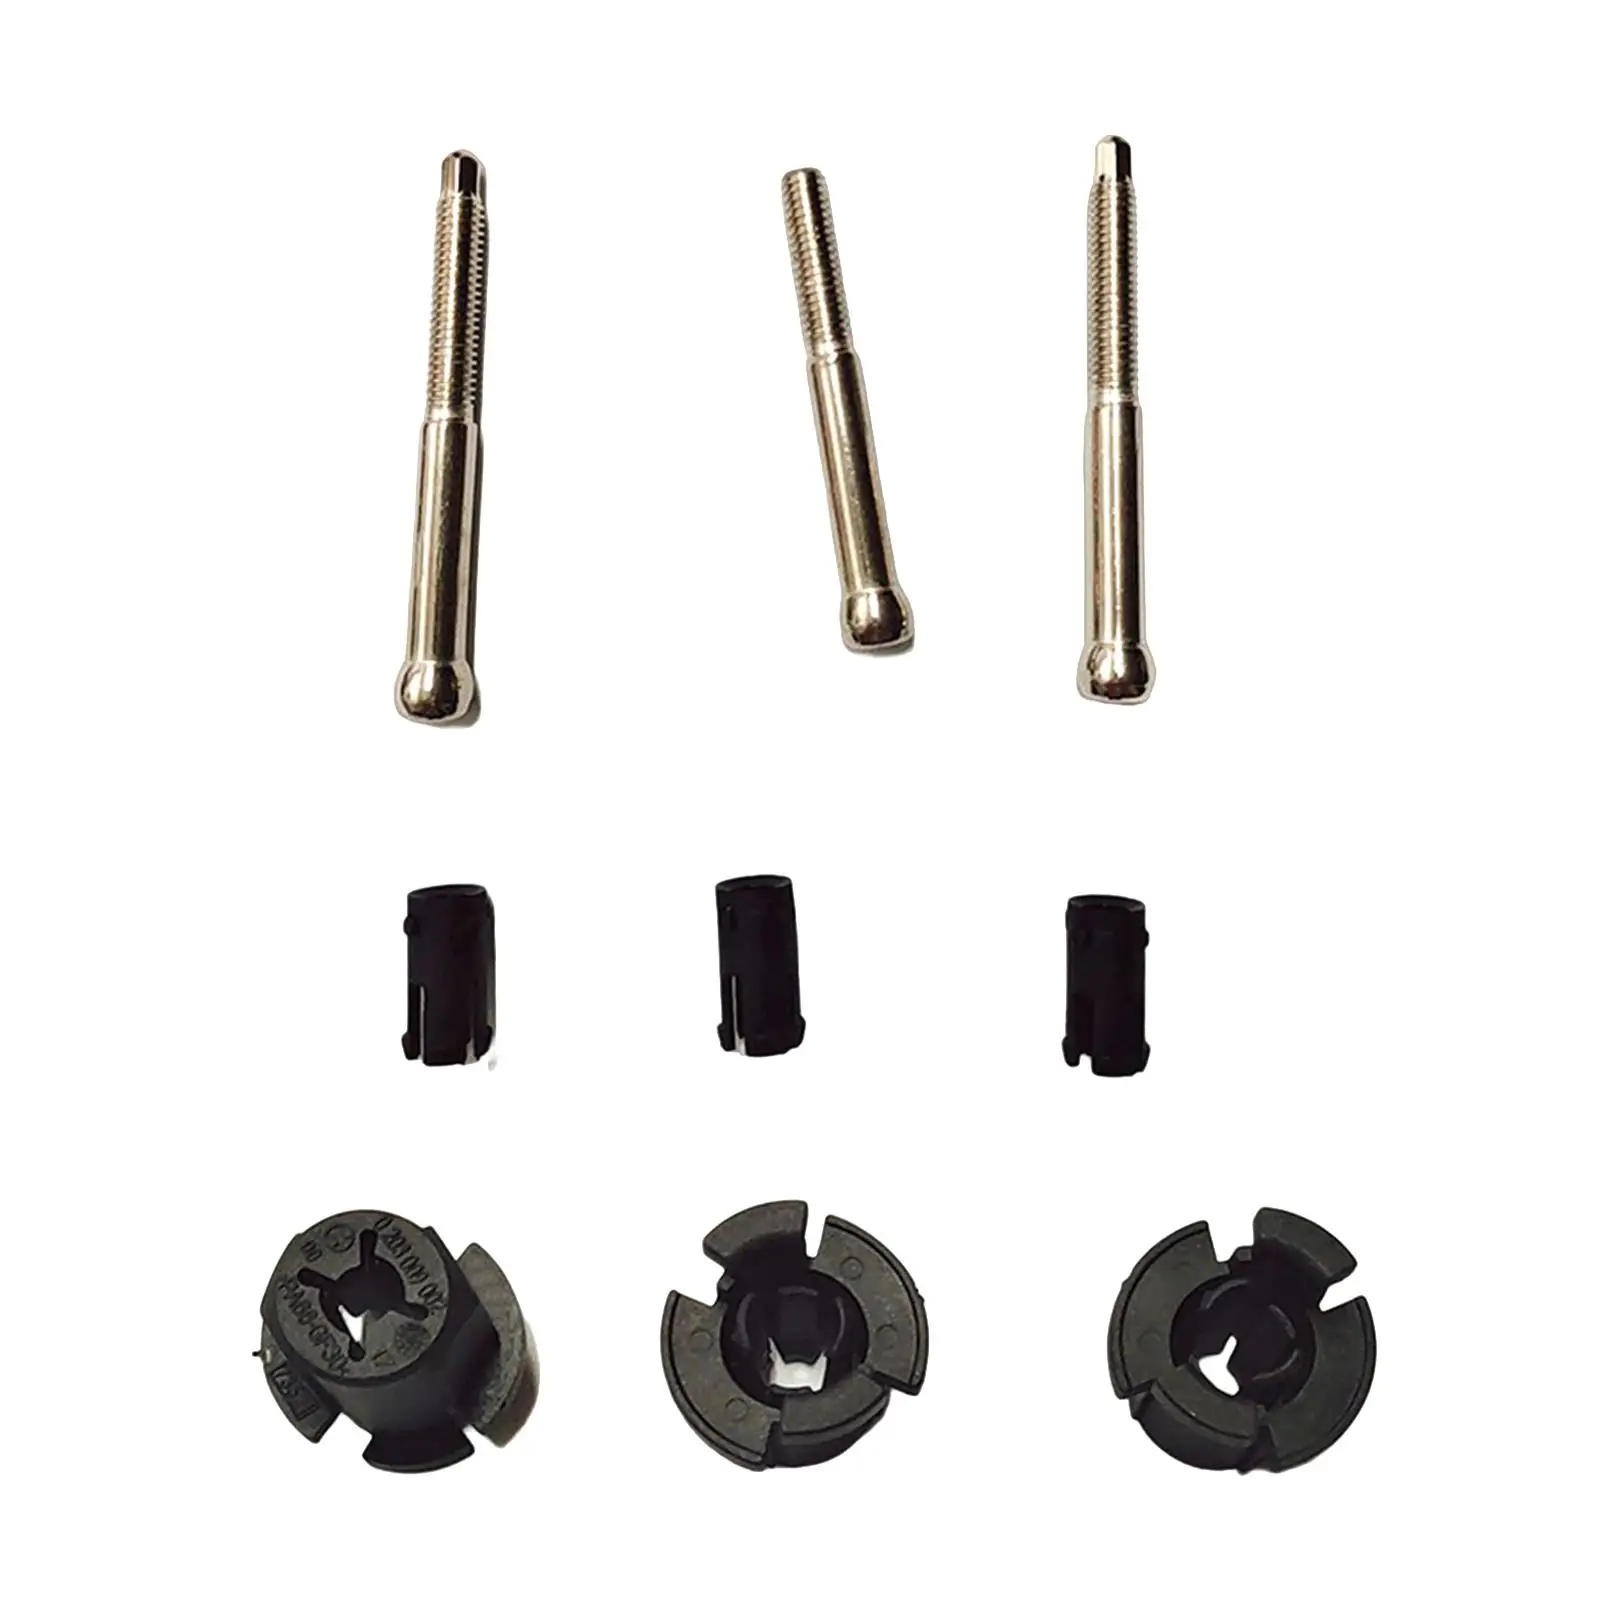 Cruise Control Distance transducer Mounting Repair Kit Durable Replacement for A6L C7